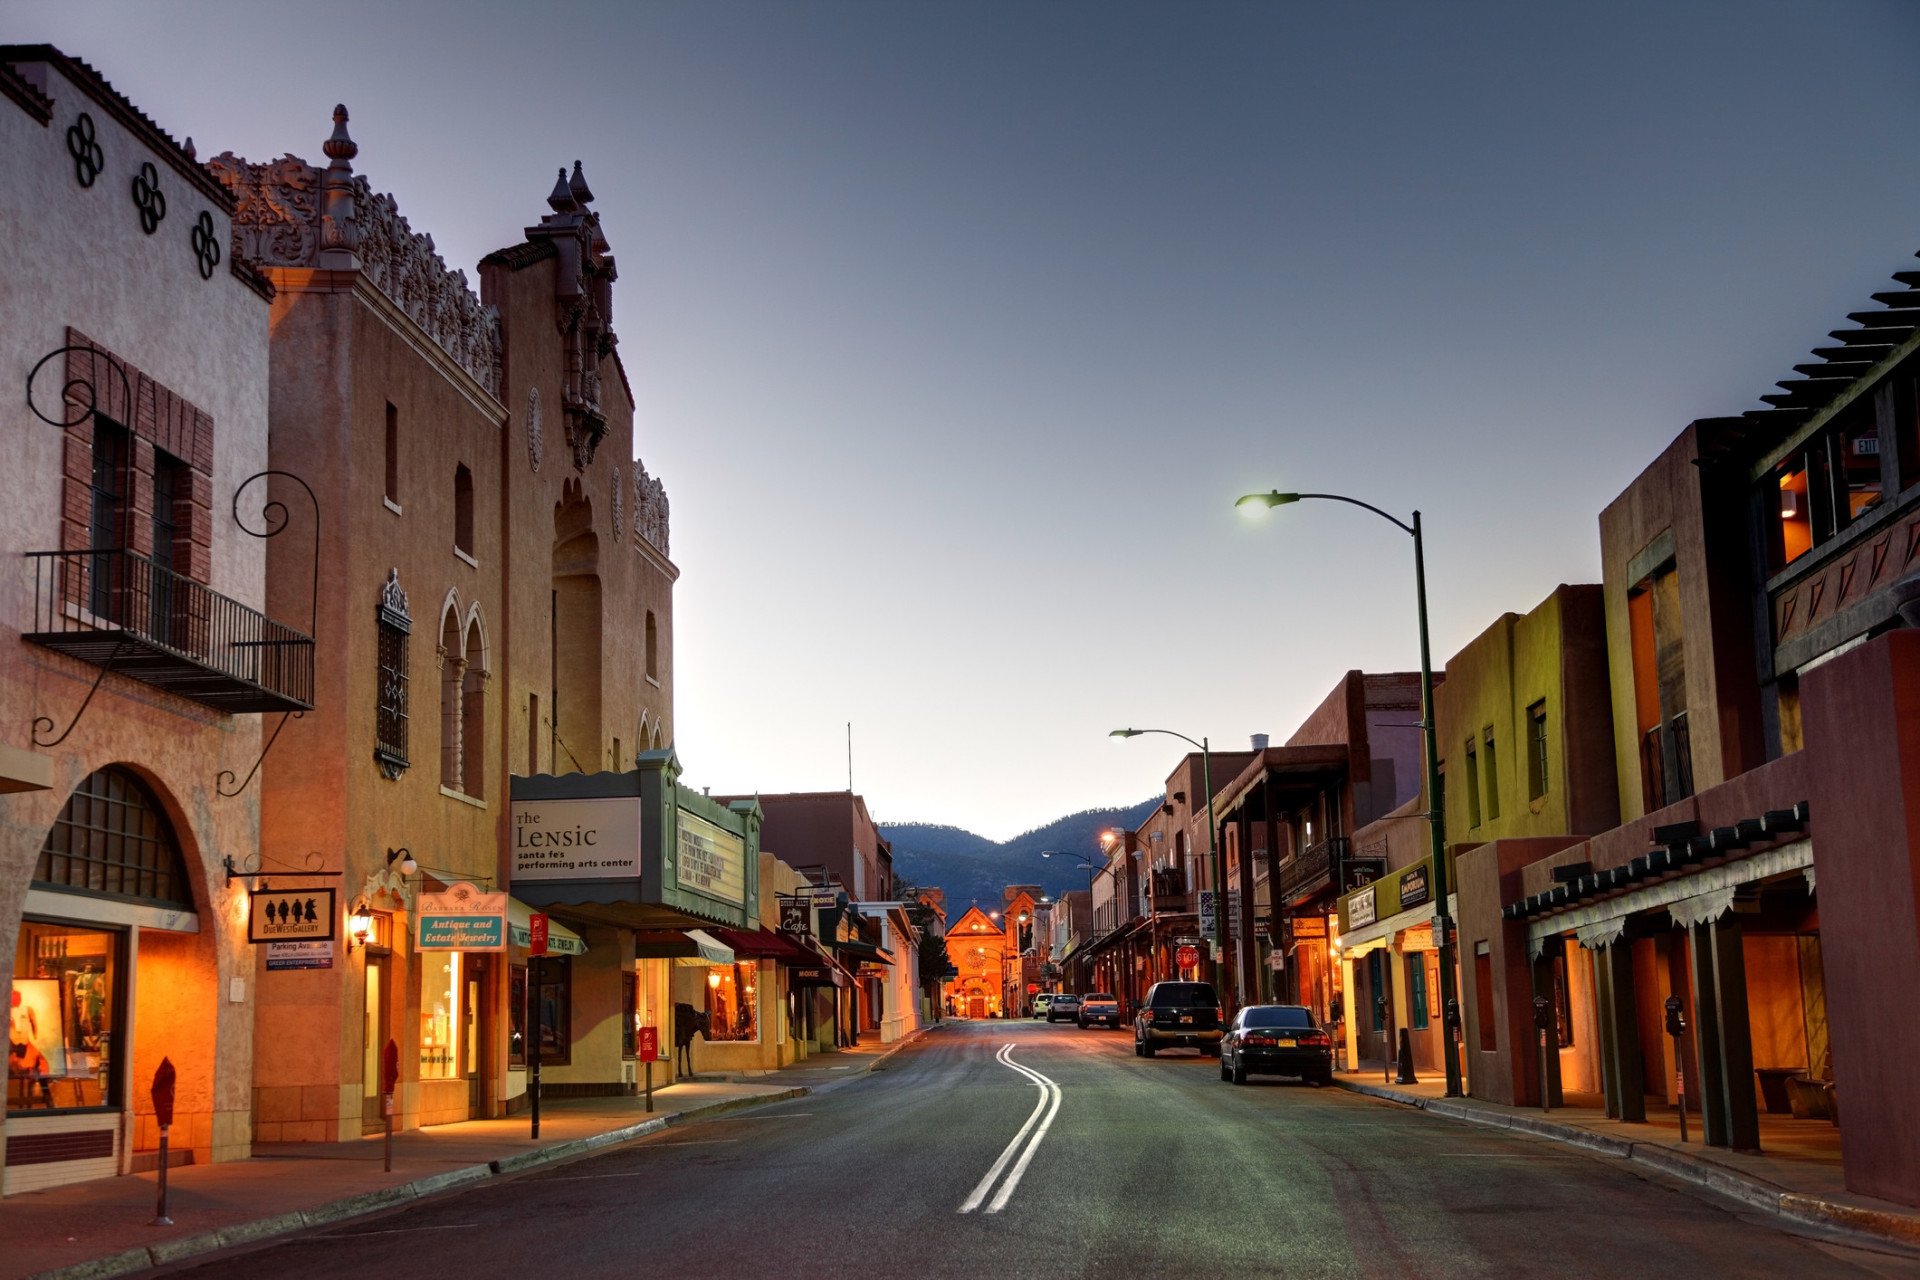 Santa Fe boasts sunshine and good weather most of the year, and it has a bustling art scene and nightlife, aside from the gorgeous scenery it offers.<p><a href="https://www.msn.com/en-us/community/channel/vid-7xx8mnucu55yw63we9va2gwr7uihbxwc68fxqp25x6tg4ftibpra?cvid=94631541bc0f4f89bfd59158d696ad7e">Follow us and access great exclusive content every day</a></p>